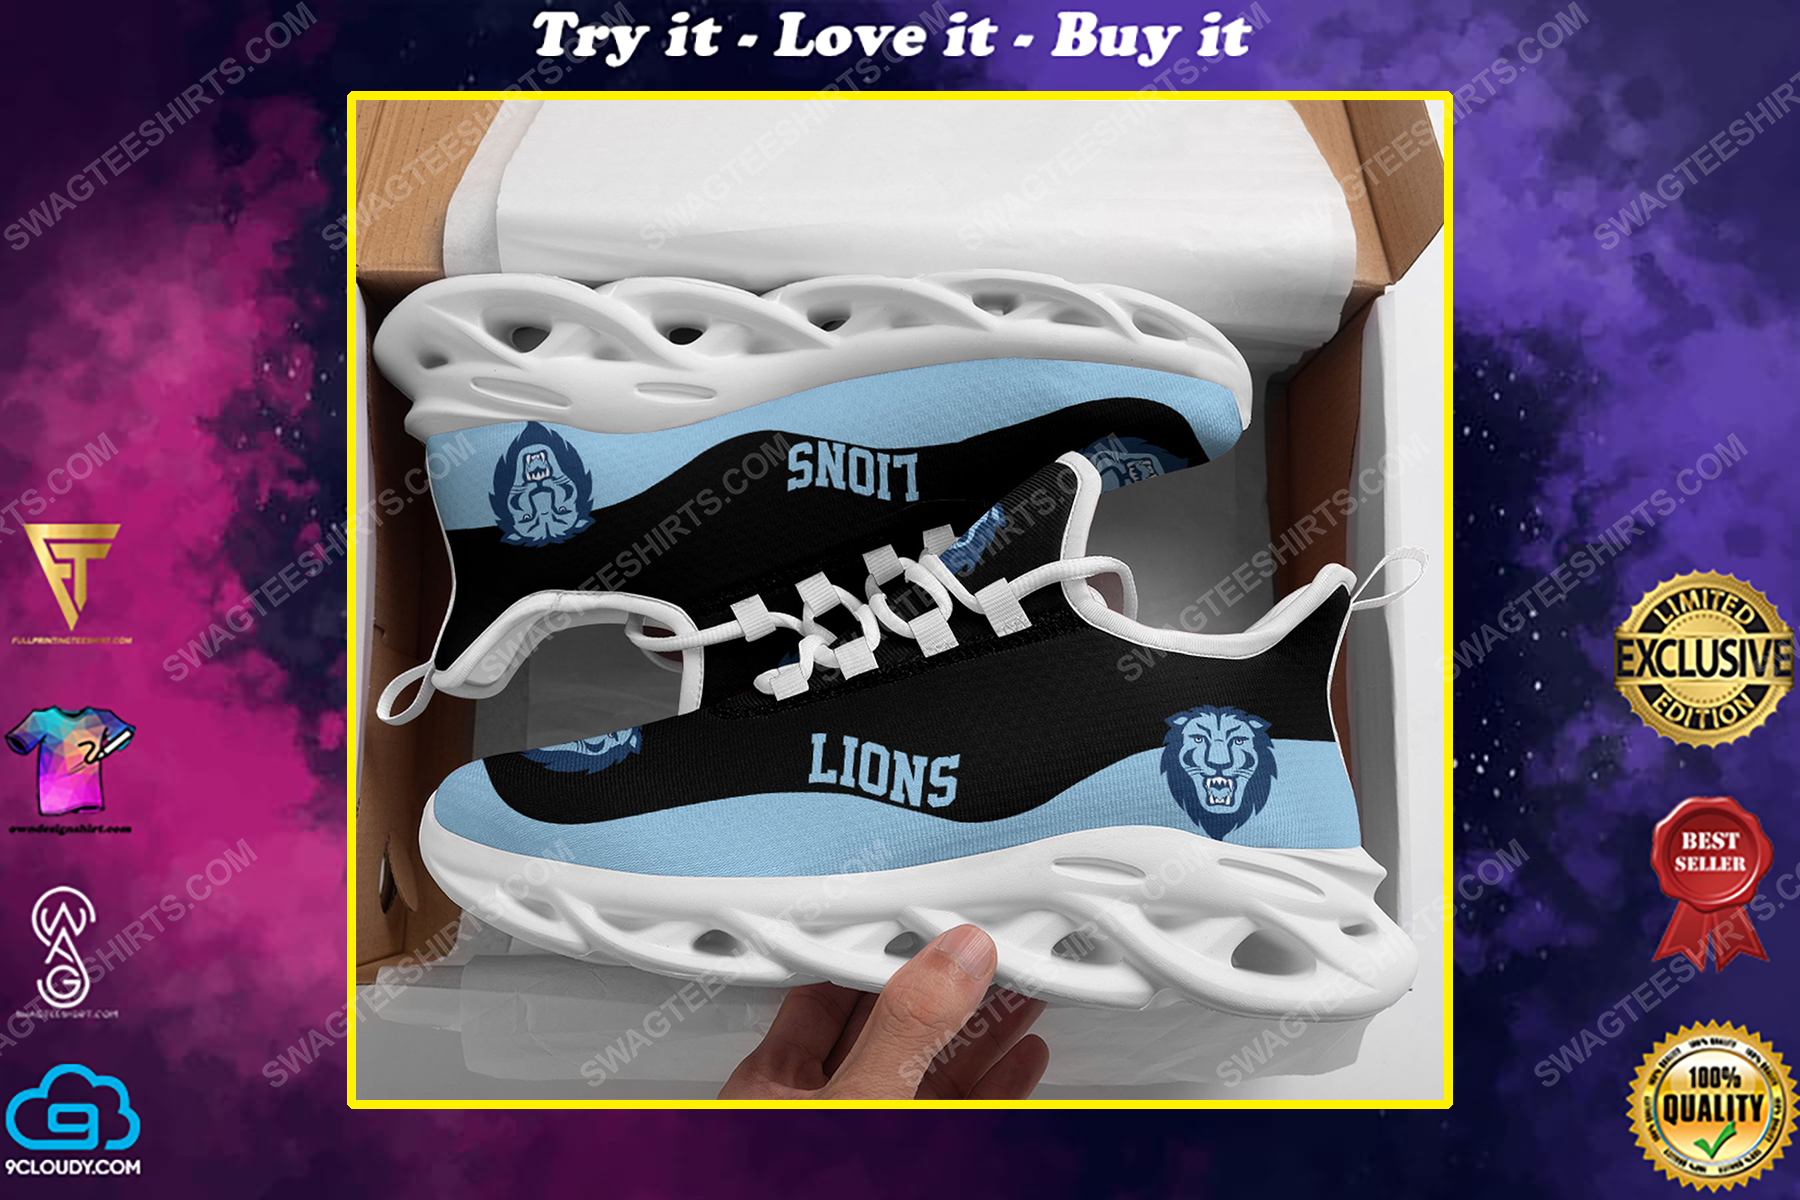 The columbia lions football team max soul shoes